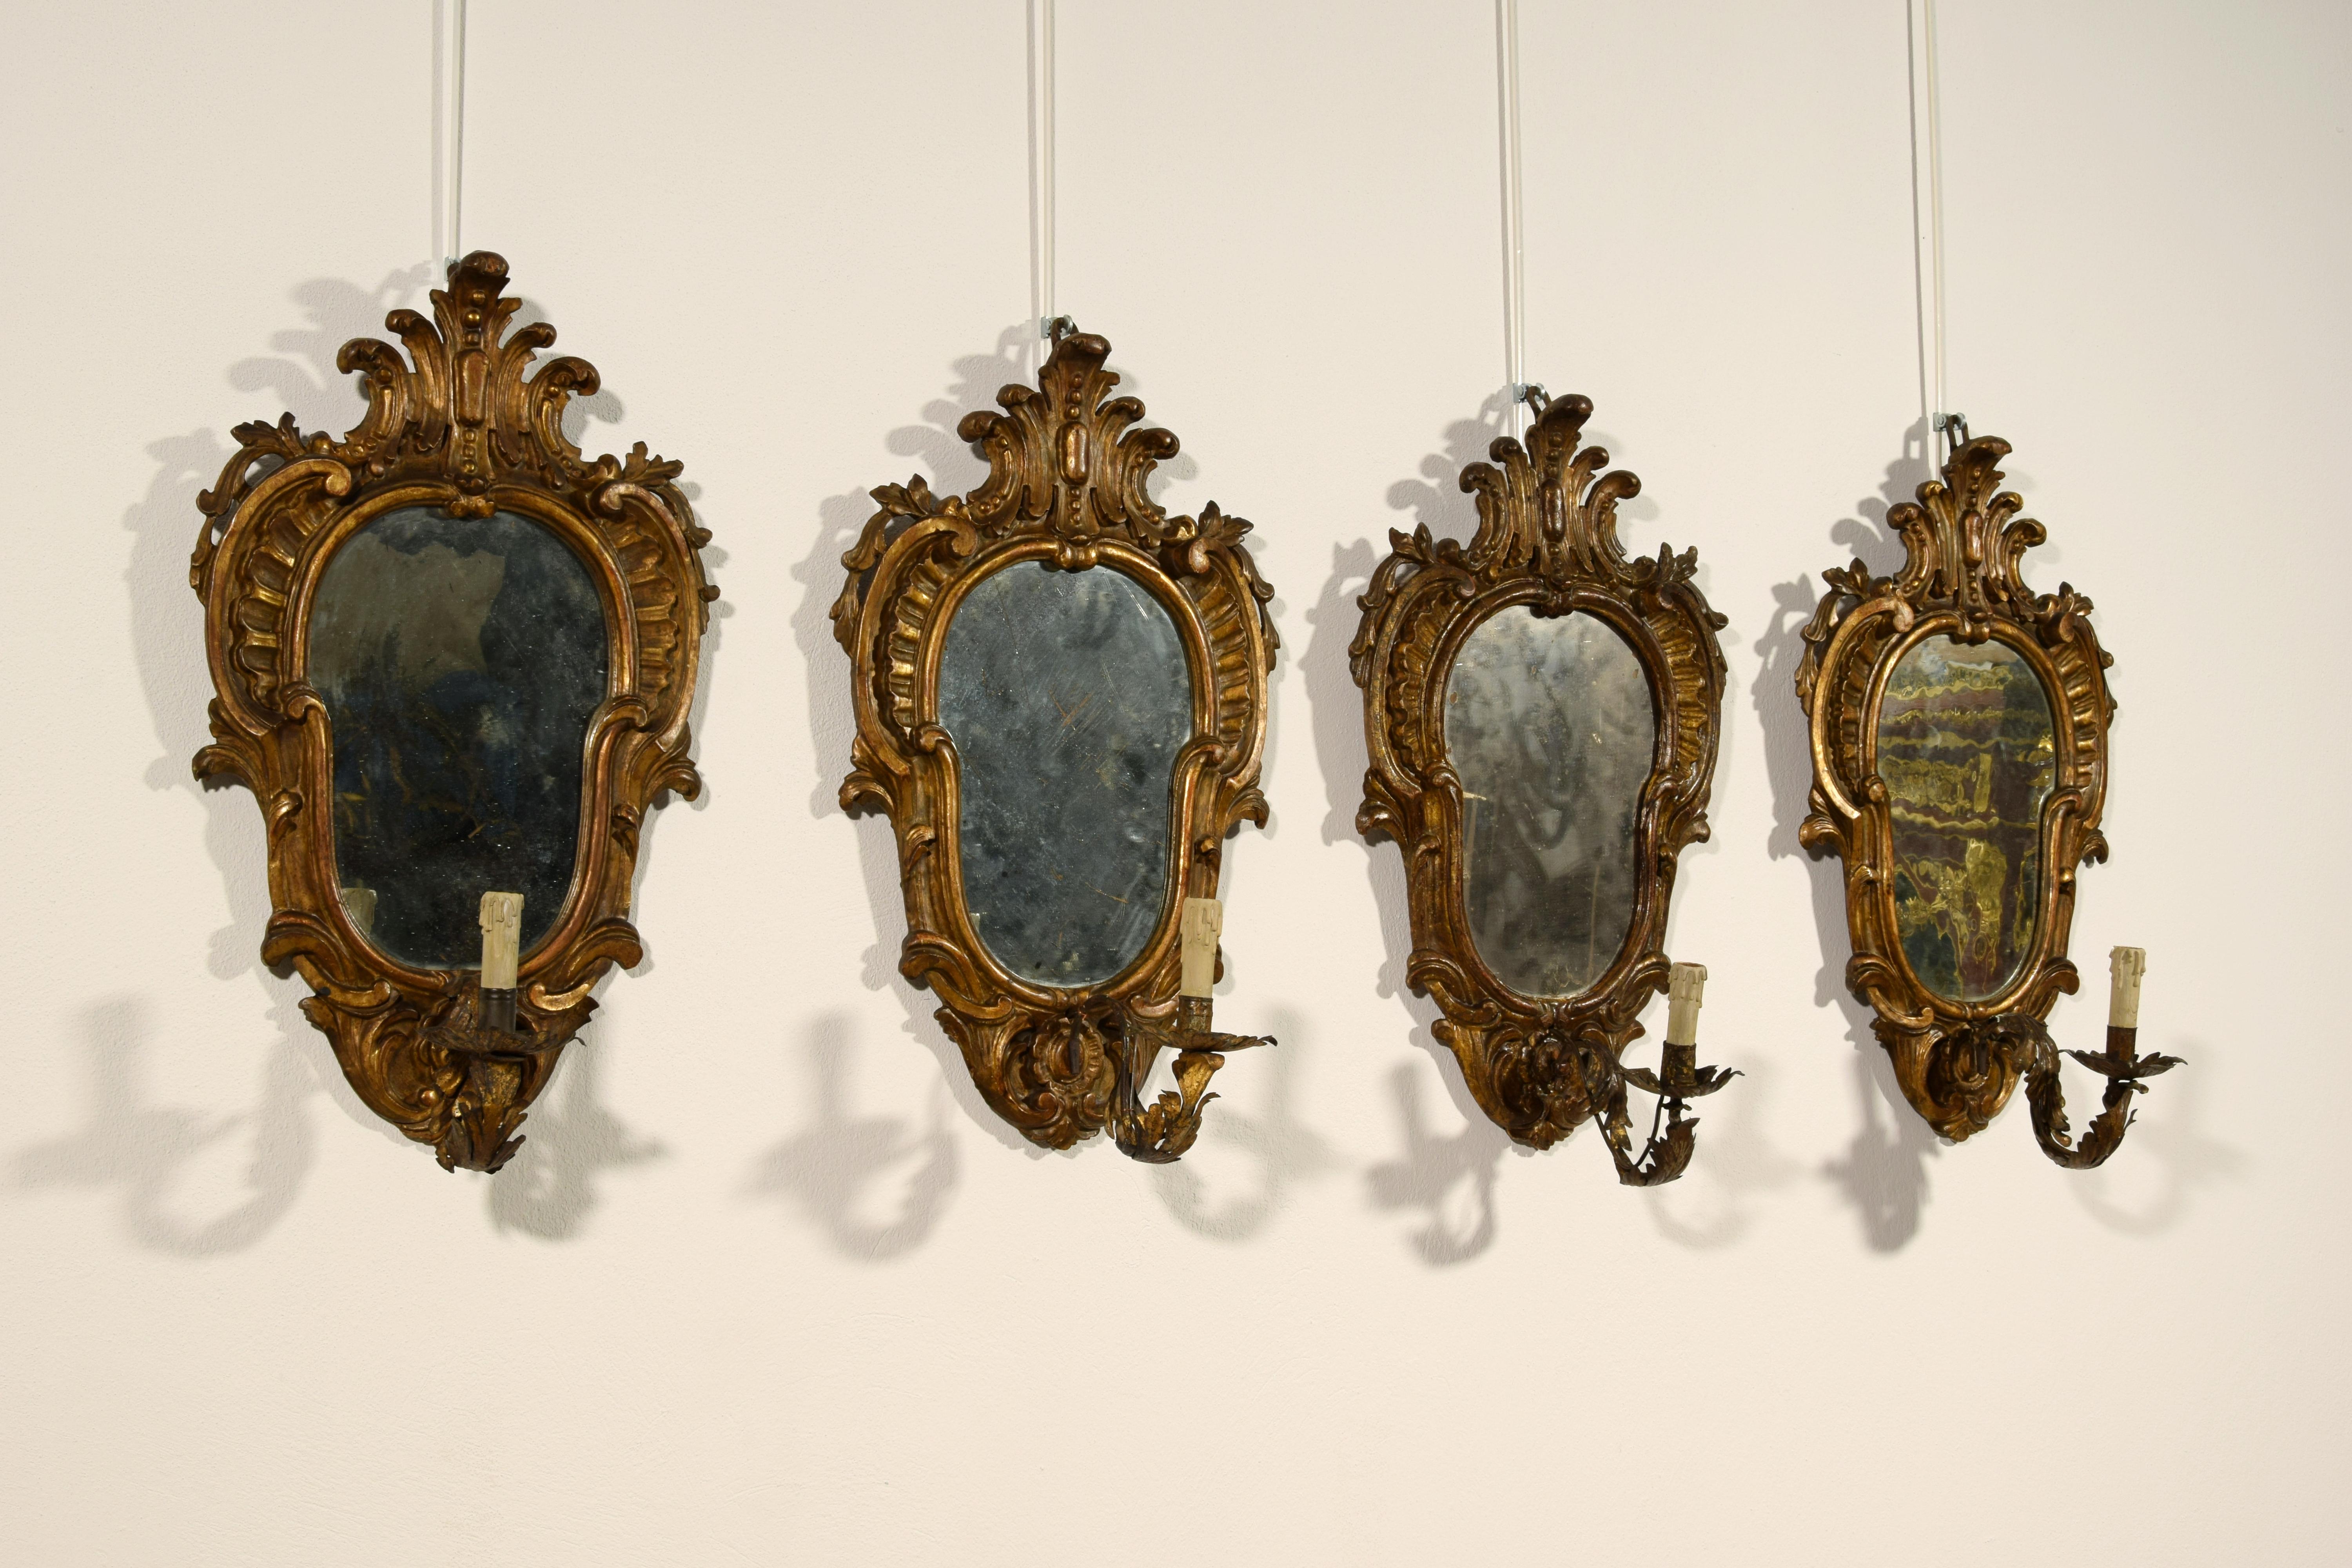 19th century, Four Italian carved giltwood Louis XV style sconces
Measurements: cm H 60 x W 37 x D 22 maximum (only mirror D 6 cm)
The four delightful sconces with mirror and lamp holder, made in the 19th century in Louis XV style in Turin